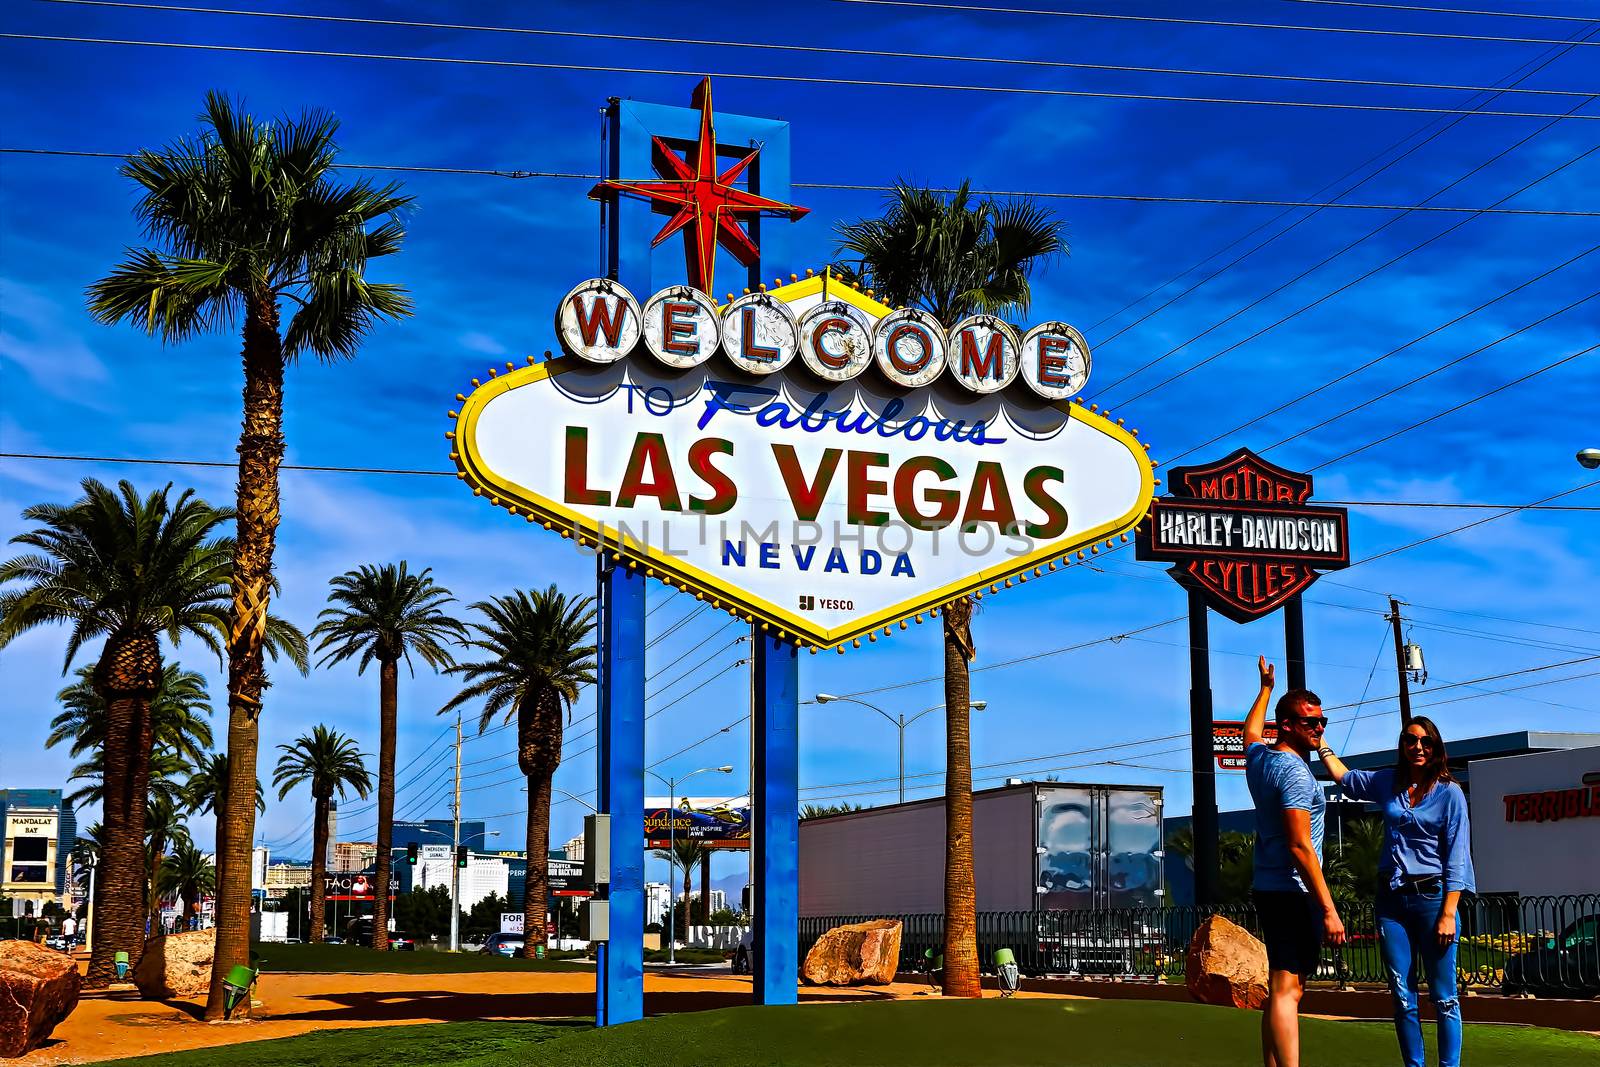 The Welcome to Fabulous Las Vegas sign on bright sunny day in Las Vegas, Nevada USA,07 Oct 2016 by USA-TARO